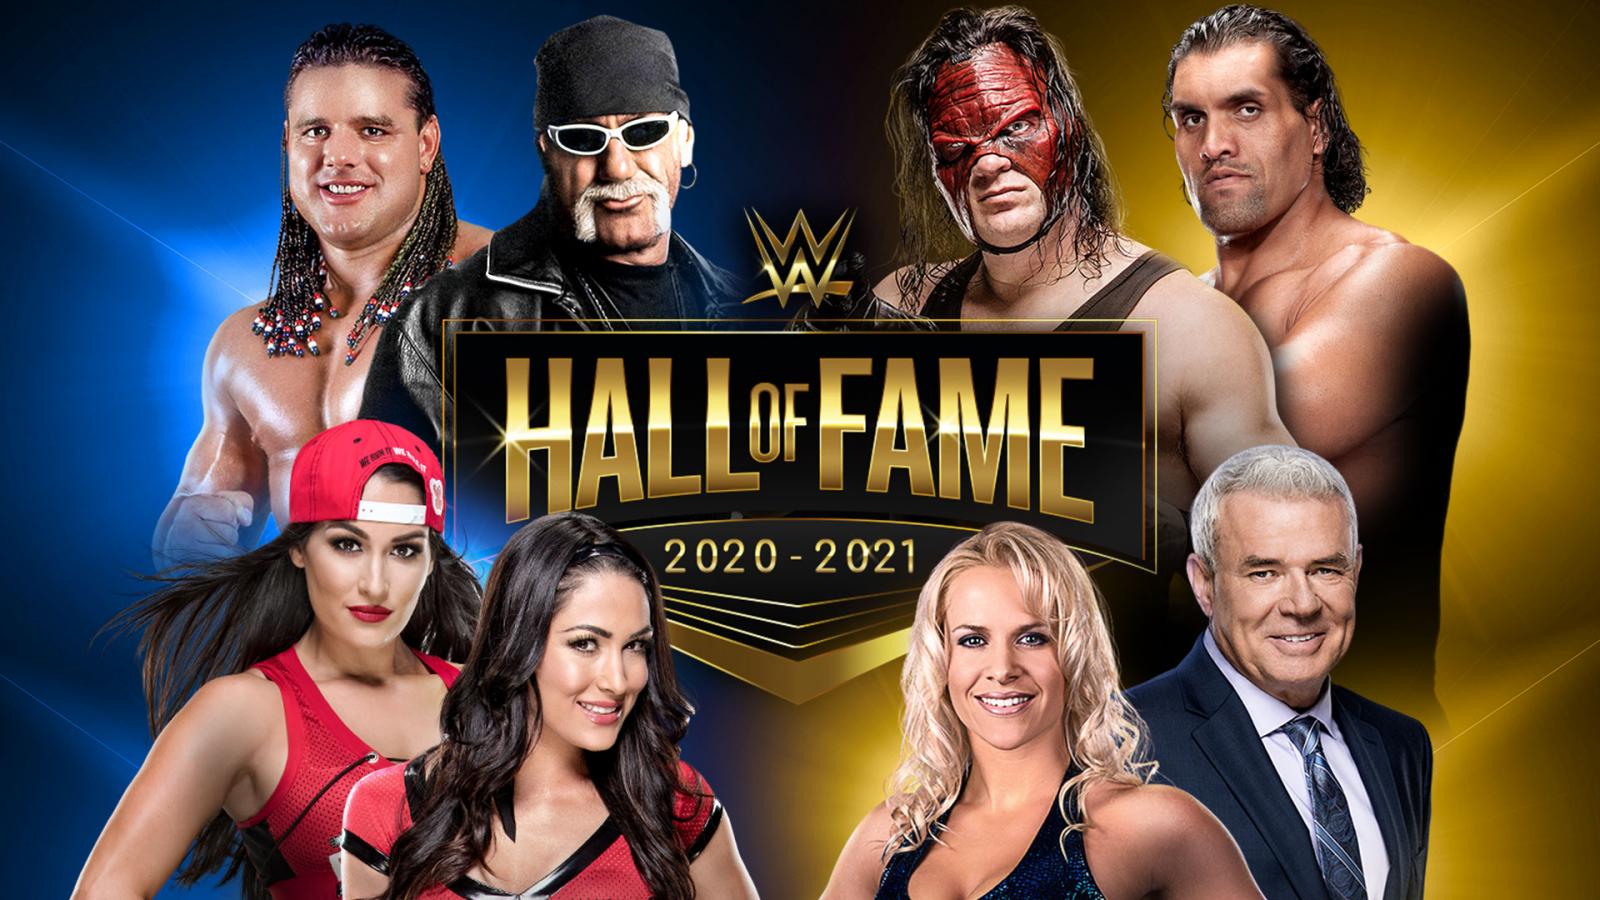 Recap of the 2021 WWE Hall of Fame ceremony